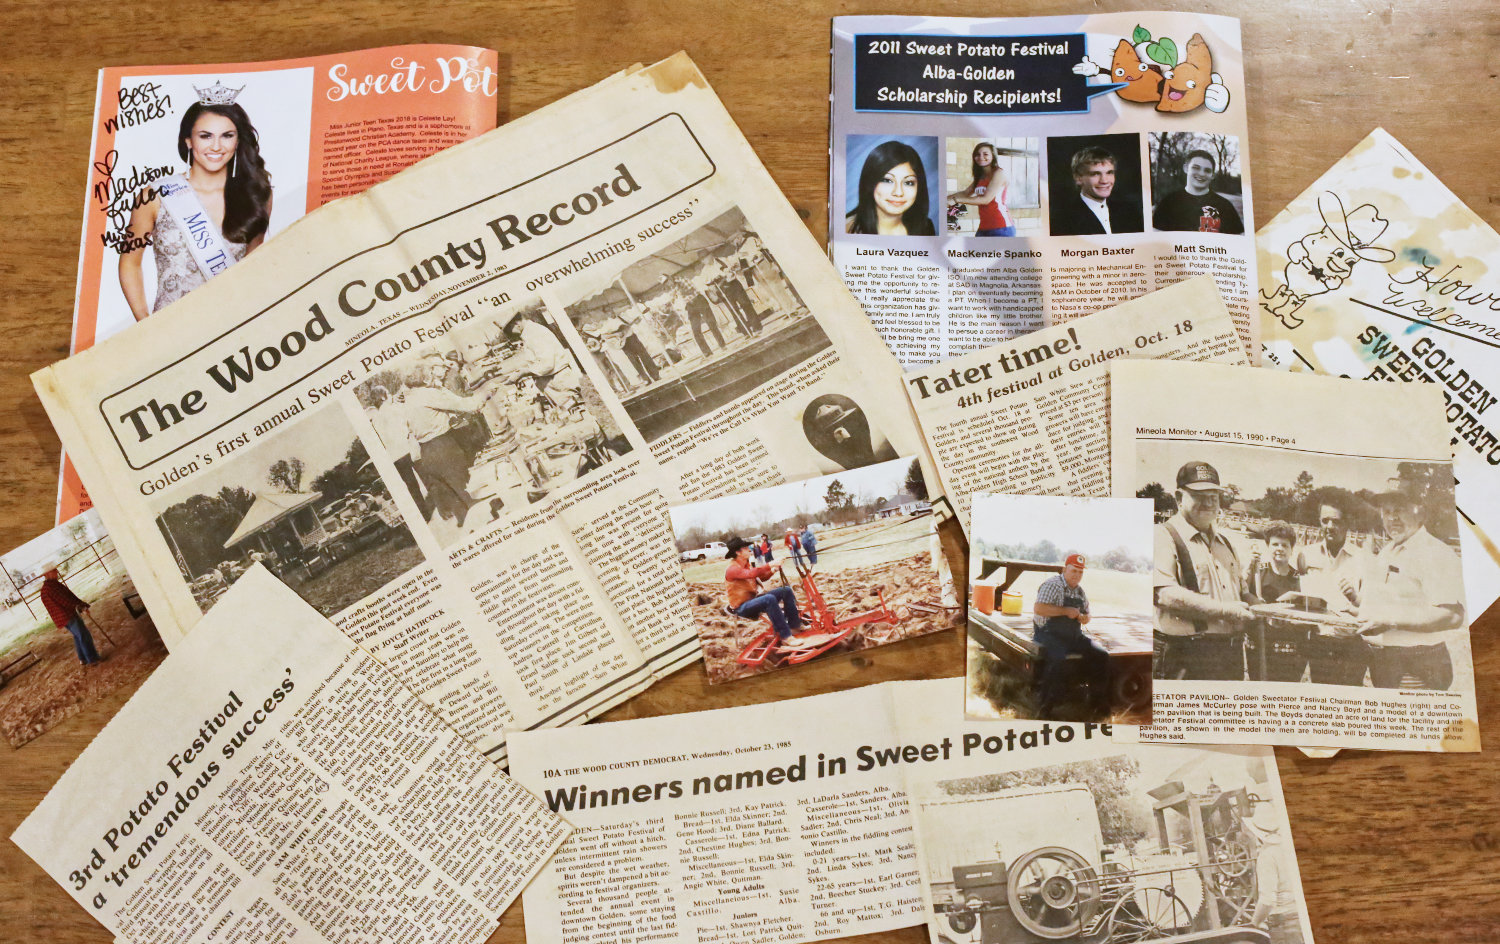 The 40-year history of the Golden Sweet Potato Festival has been well-documented.